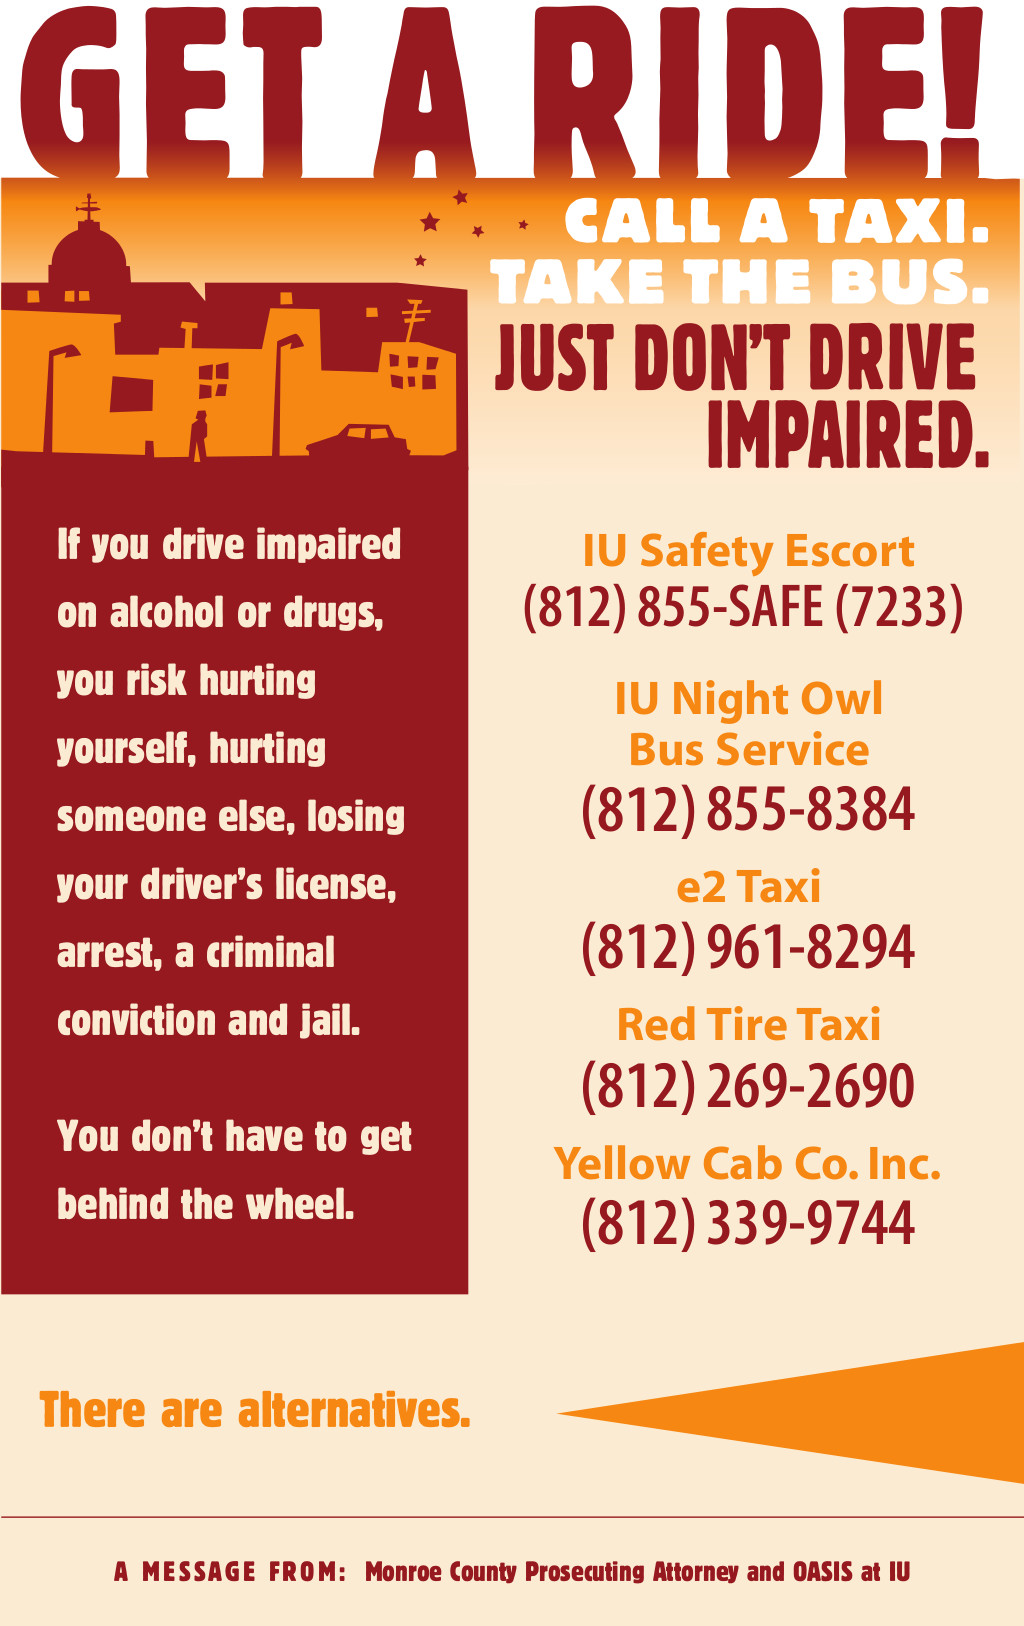 Impaired Driving Includes Alcohol & Drugs